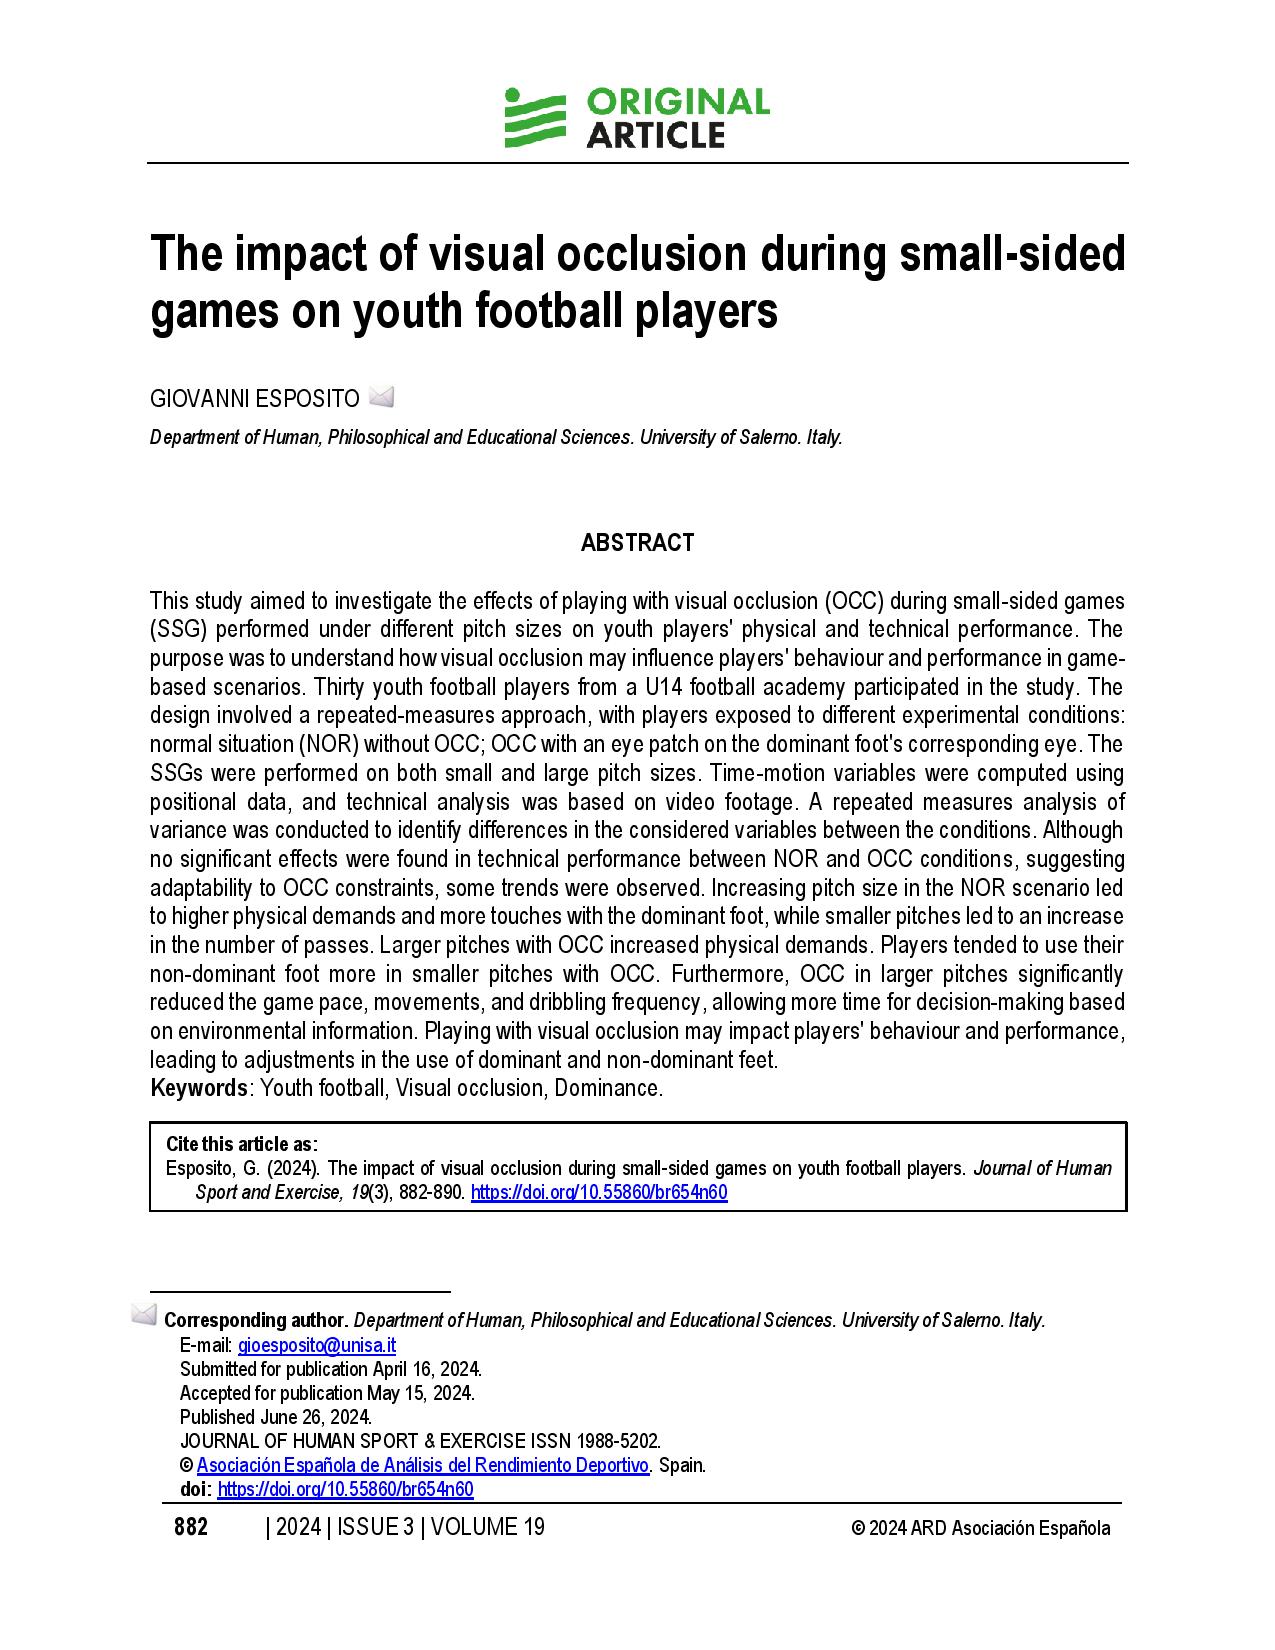 The impact of visual occlusion during small-sided games on youth football players